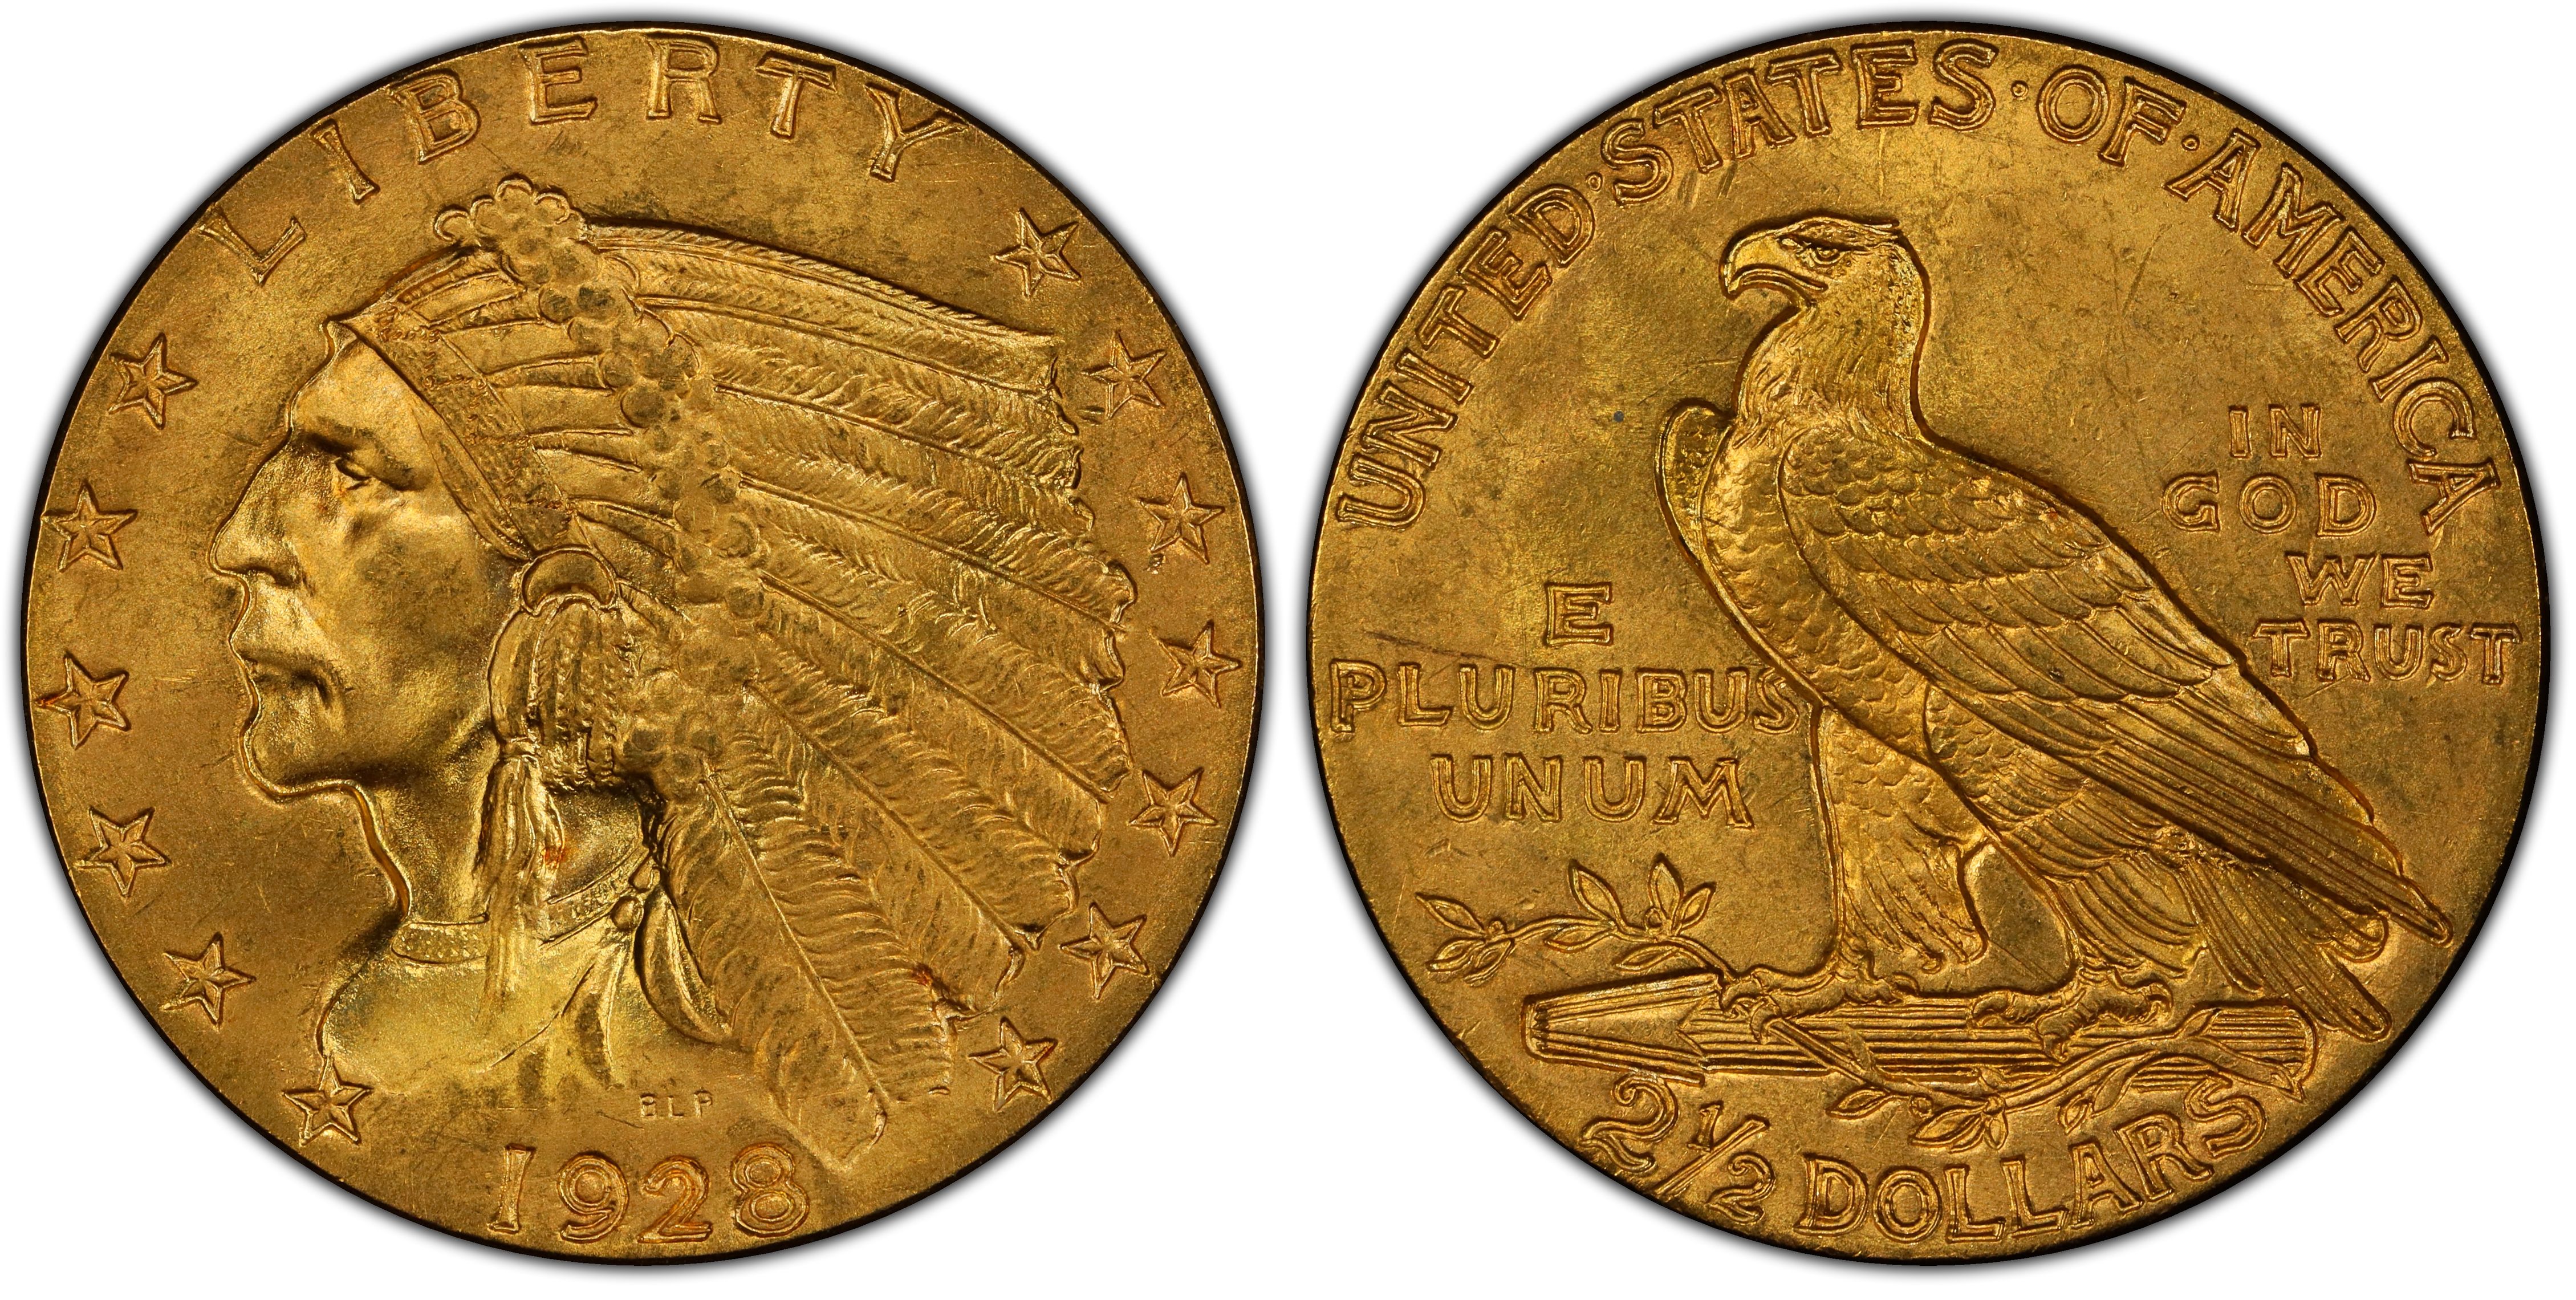 1928 $2.50 (Regular Strike) Indian $2.5 - PCGS CoinFacts